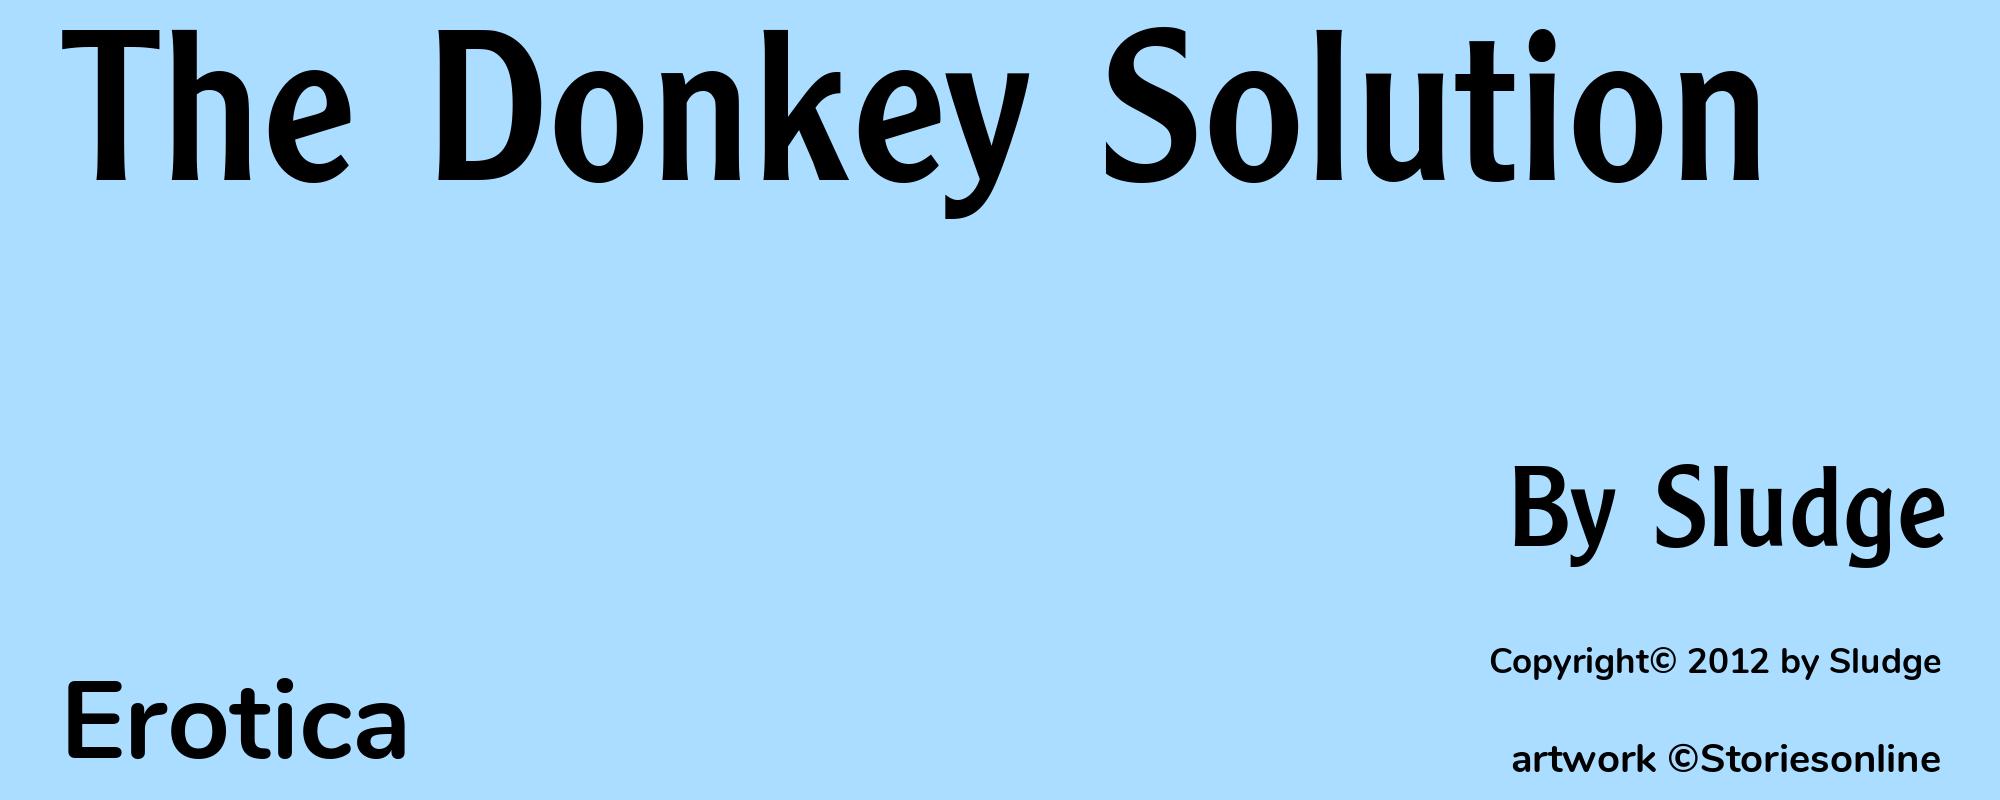 The Donkey Solution - Cover